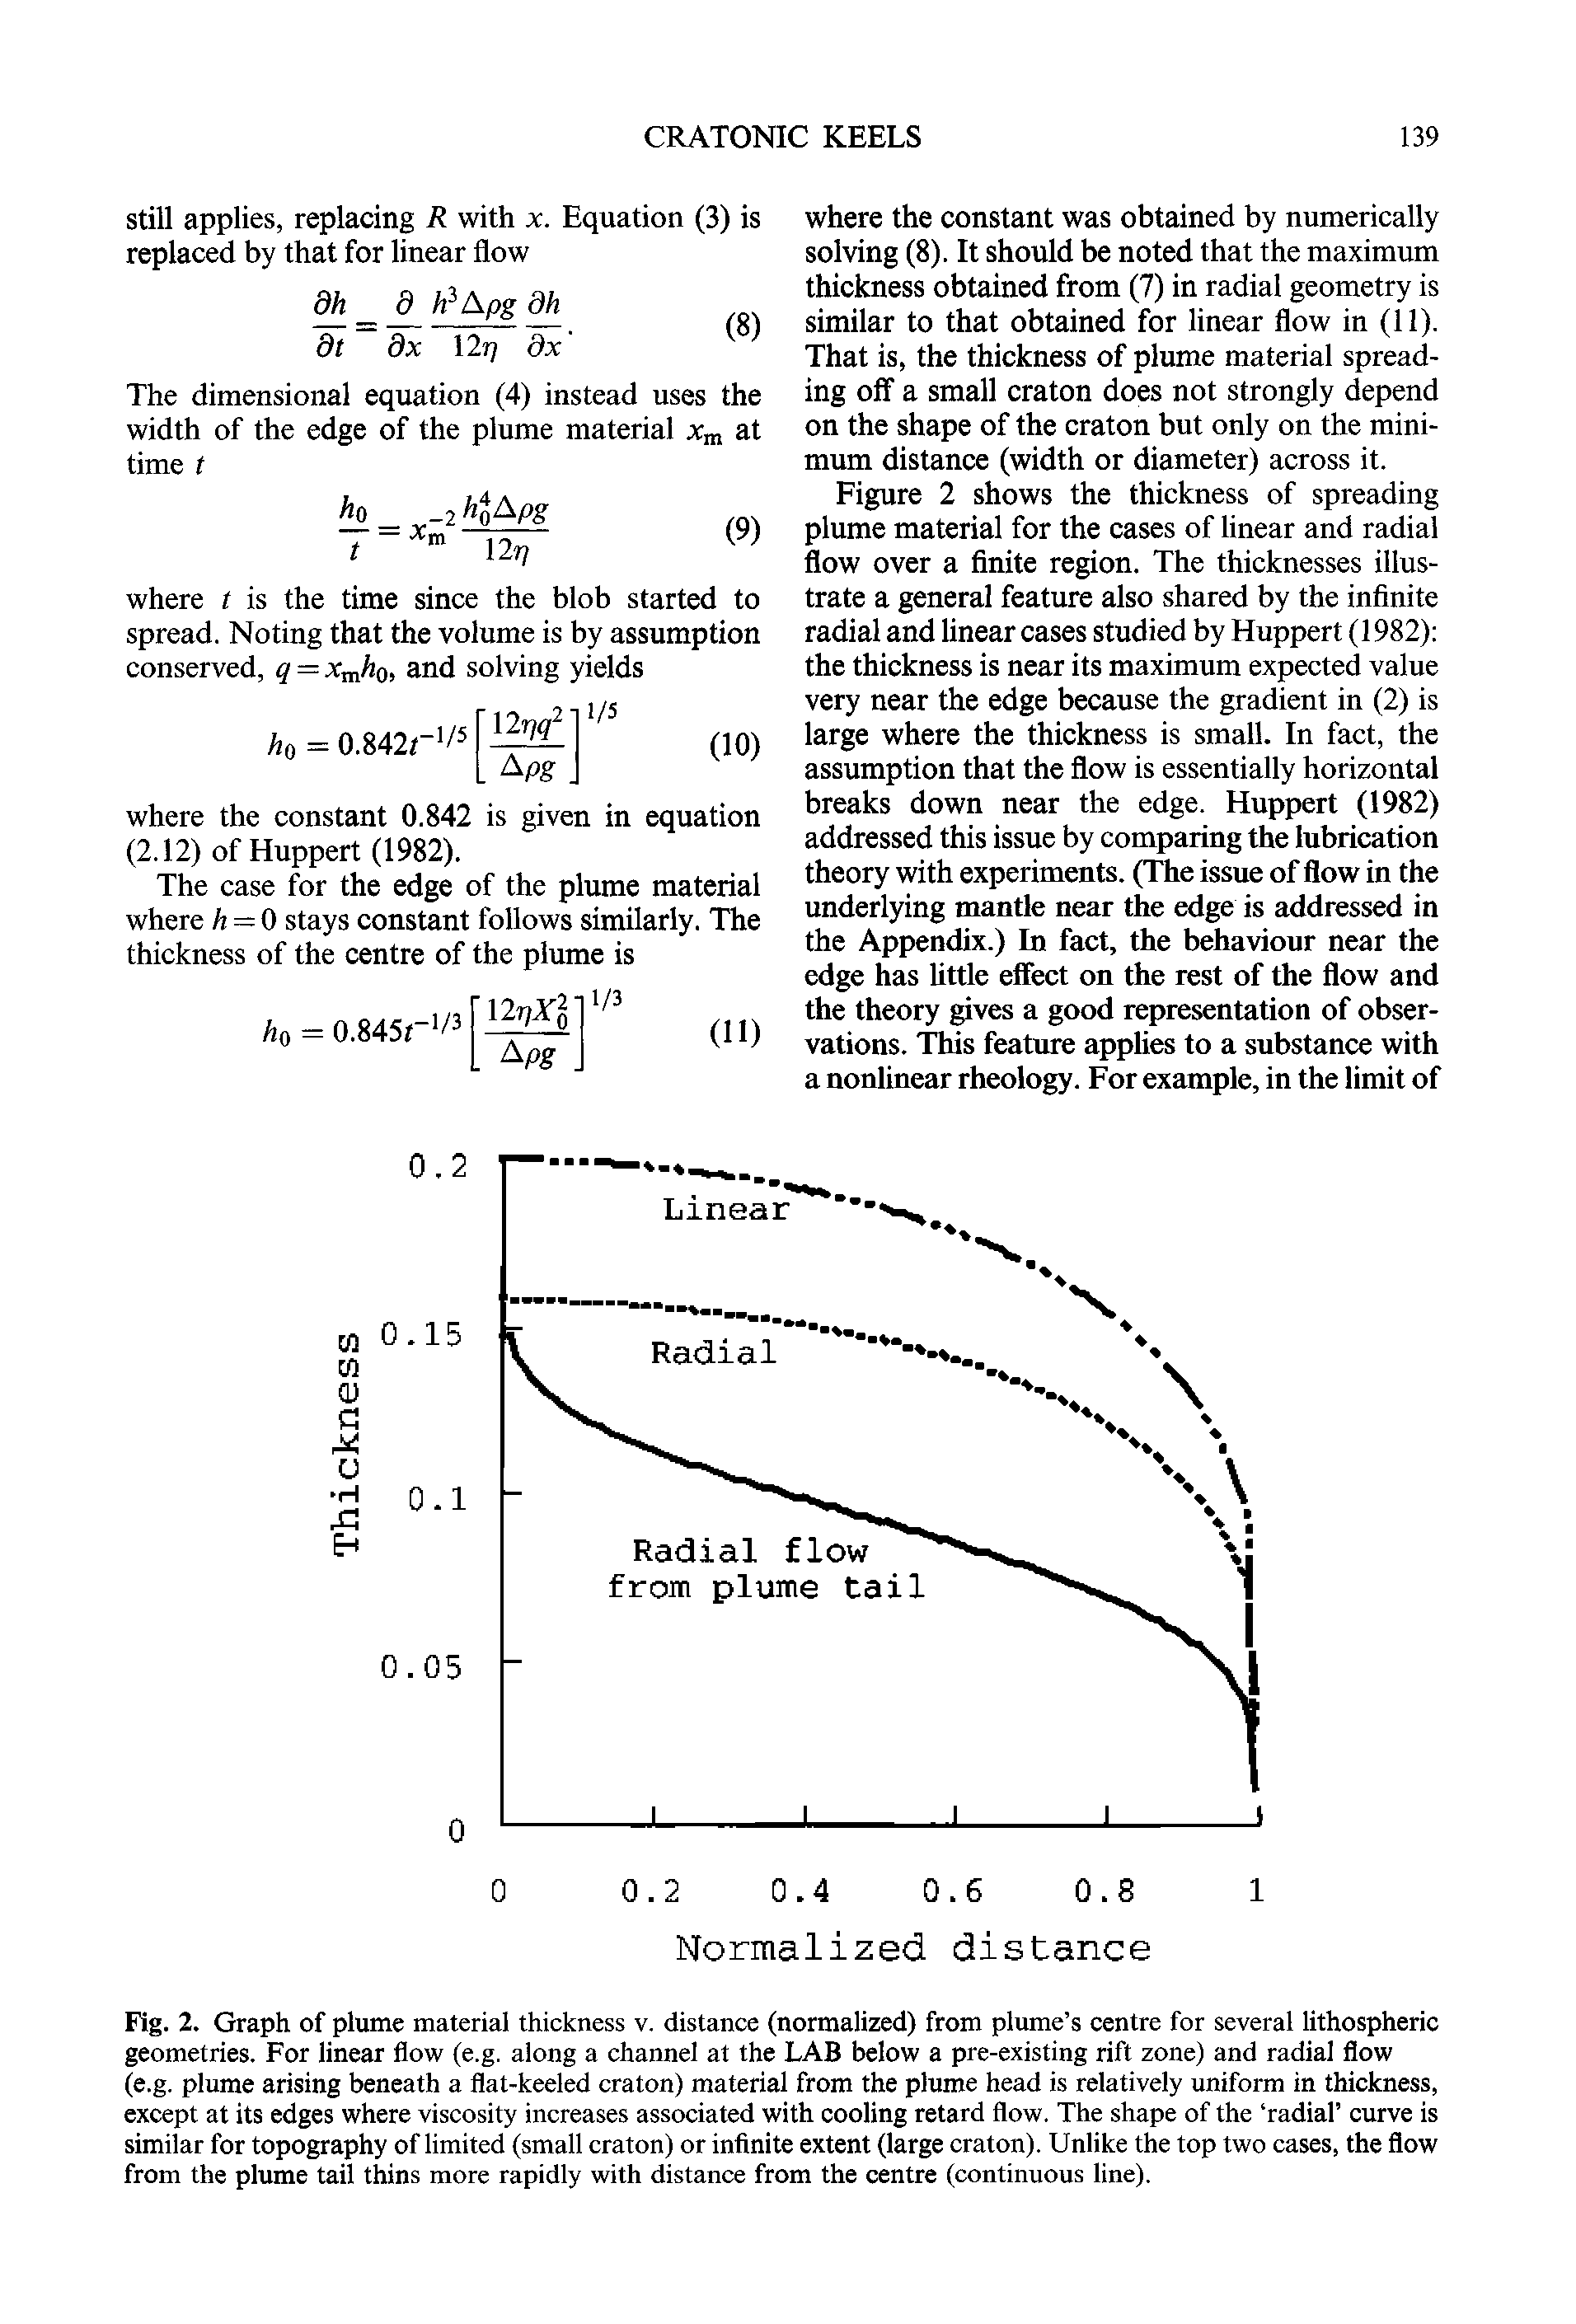 Fig. 2. Graph of plume material thickness v. distance (normalized) from plume s centre for several lithospheric geometries. For linear flow (e.g. along a channel at the LAB below a pre-existing rift zone) and radial flow (e.g. plume arising beneath a flat-keeled craton) material from the plume head is relatively uniform in thickness, except at its edges where viscosity increases associated with cooling retard flow. The shape of the radial curve is similar for topography of limited (small craton) or infinite extent (large craton). Unlike the top two cases, the flow from the plume tail thins more rapidly with distance from the centre (continuous line).